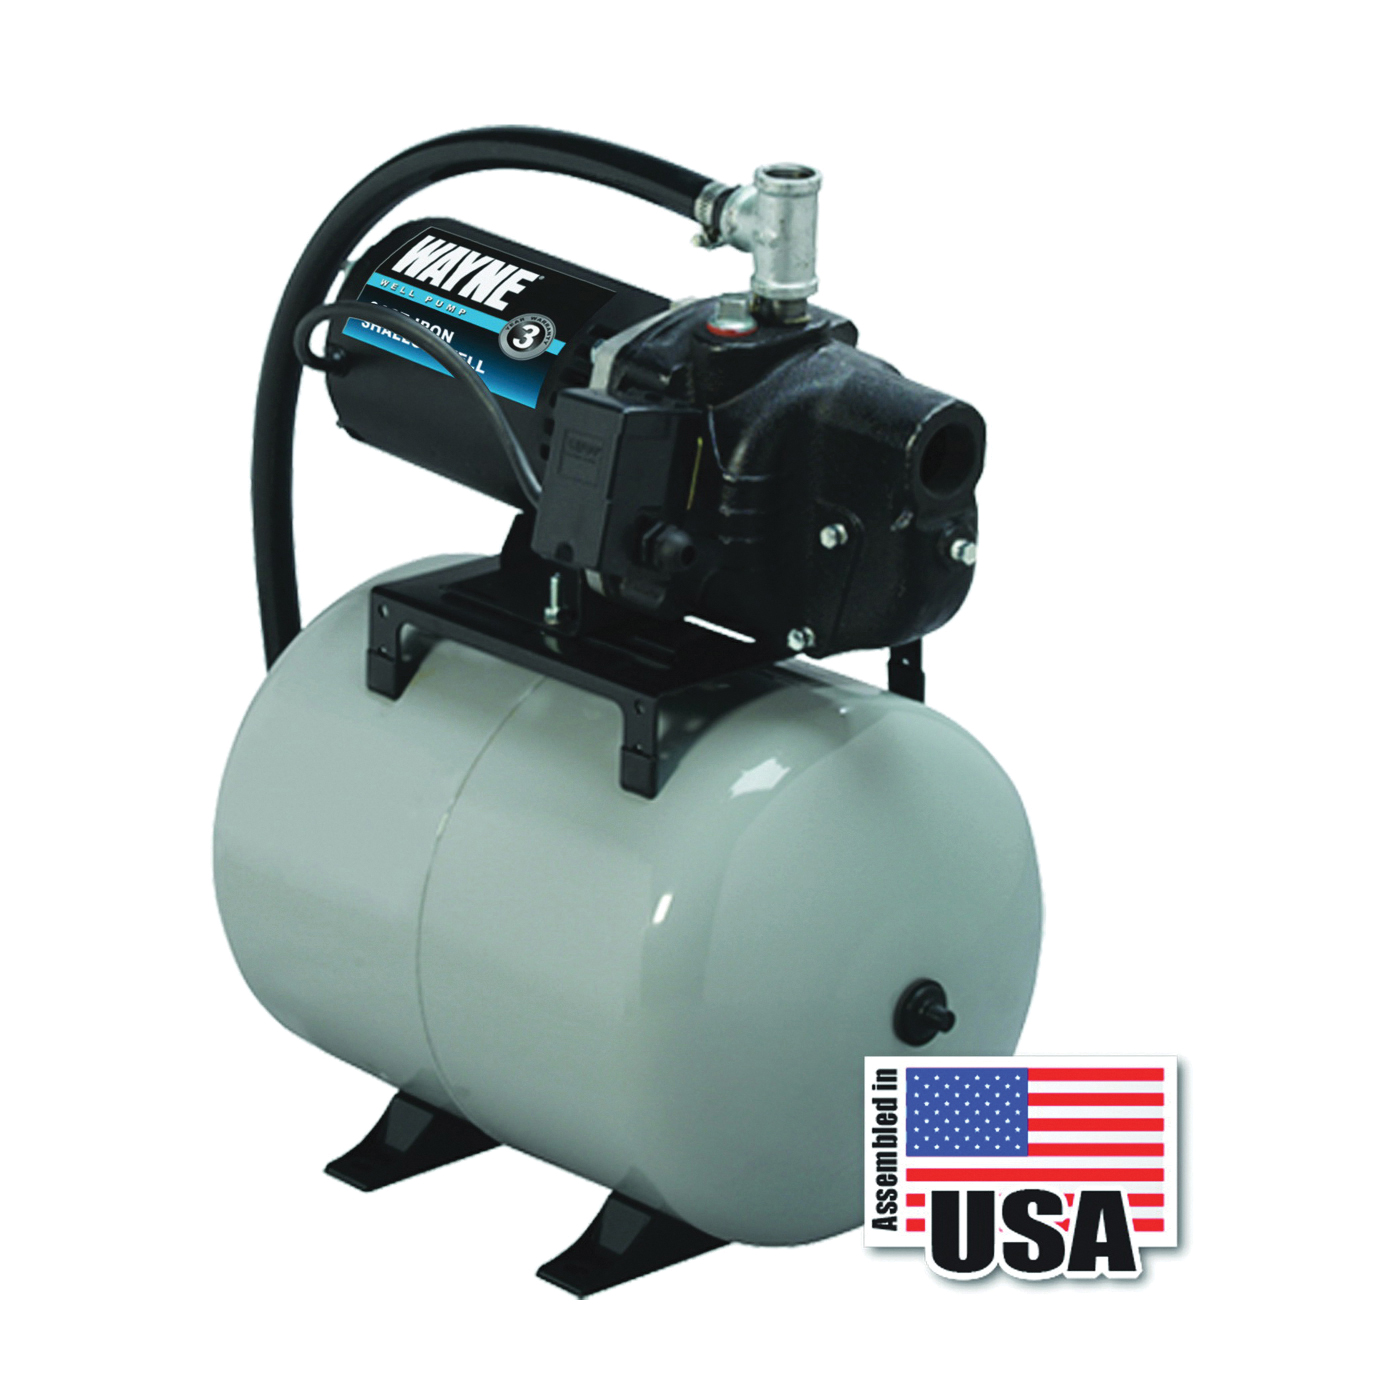 SWS50-8.5FX Jet Pump, 120/240 V, 0.5 hp, 1-1/4 in Suction, 3/4 in Discharge Connection, 25 ft Max Head, 420 gph